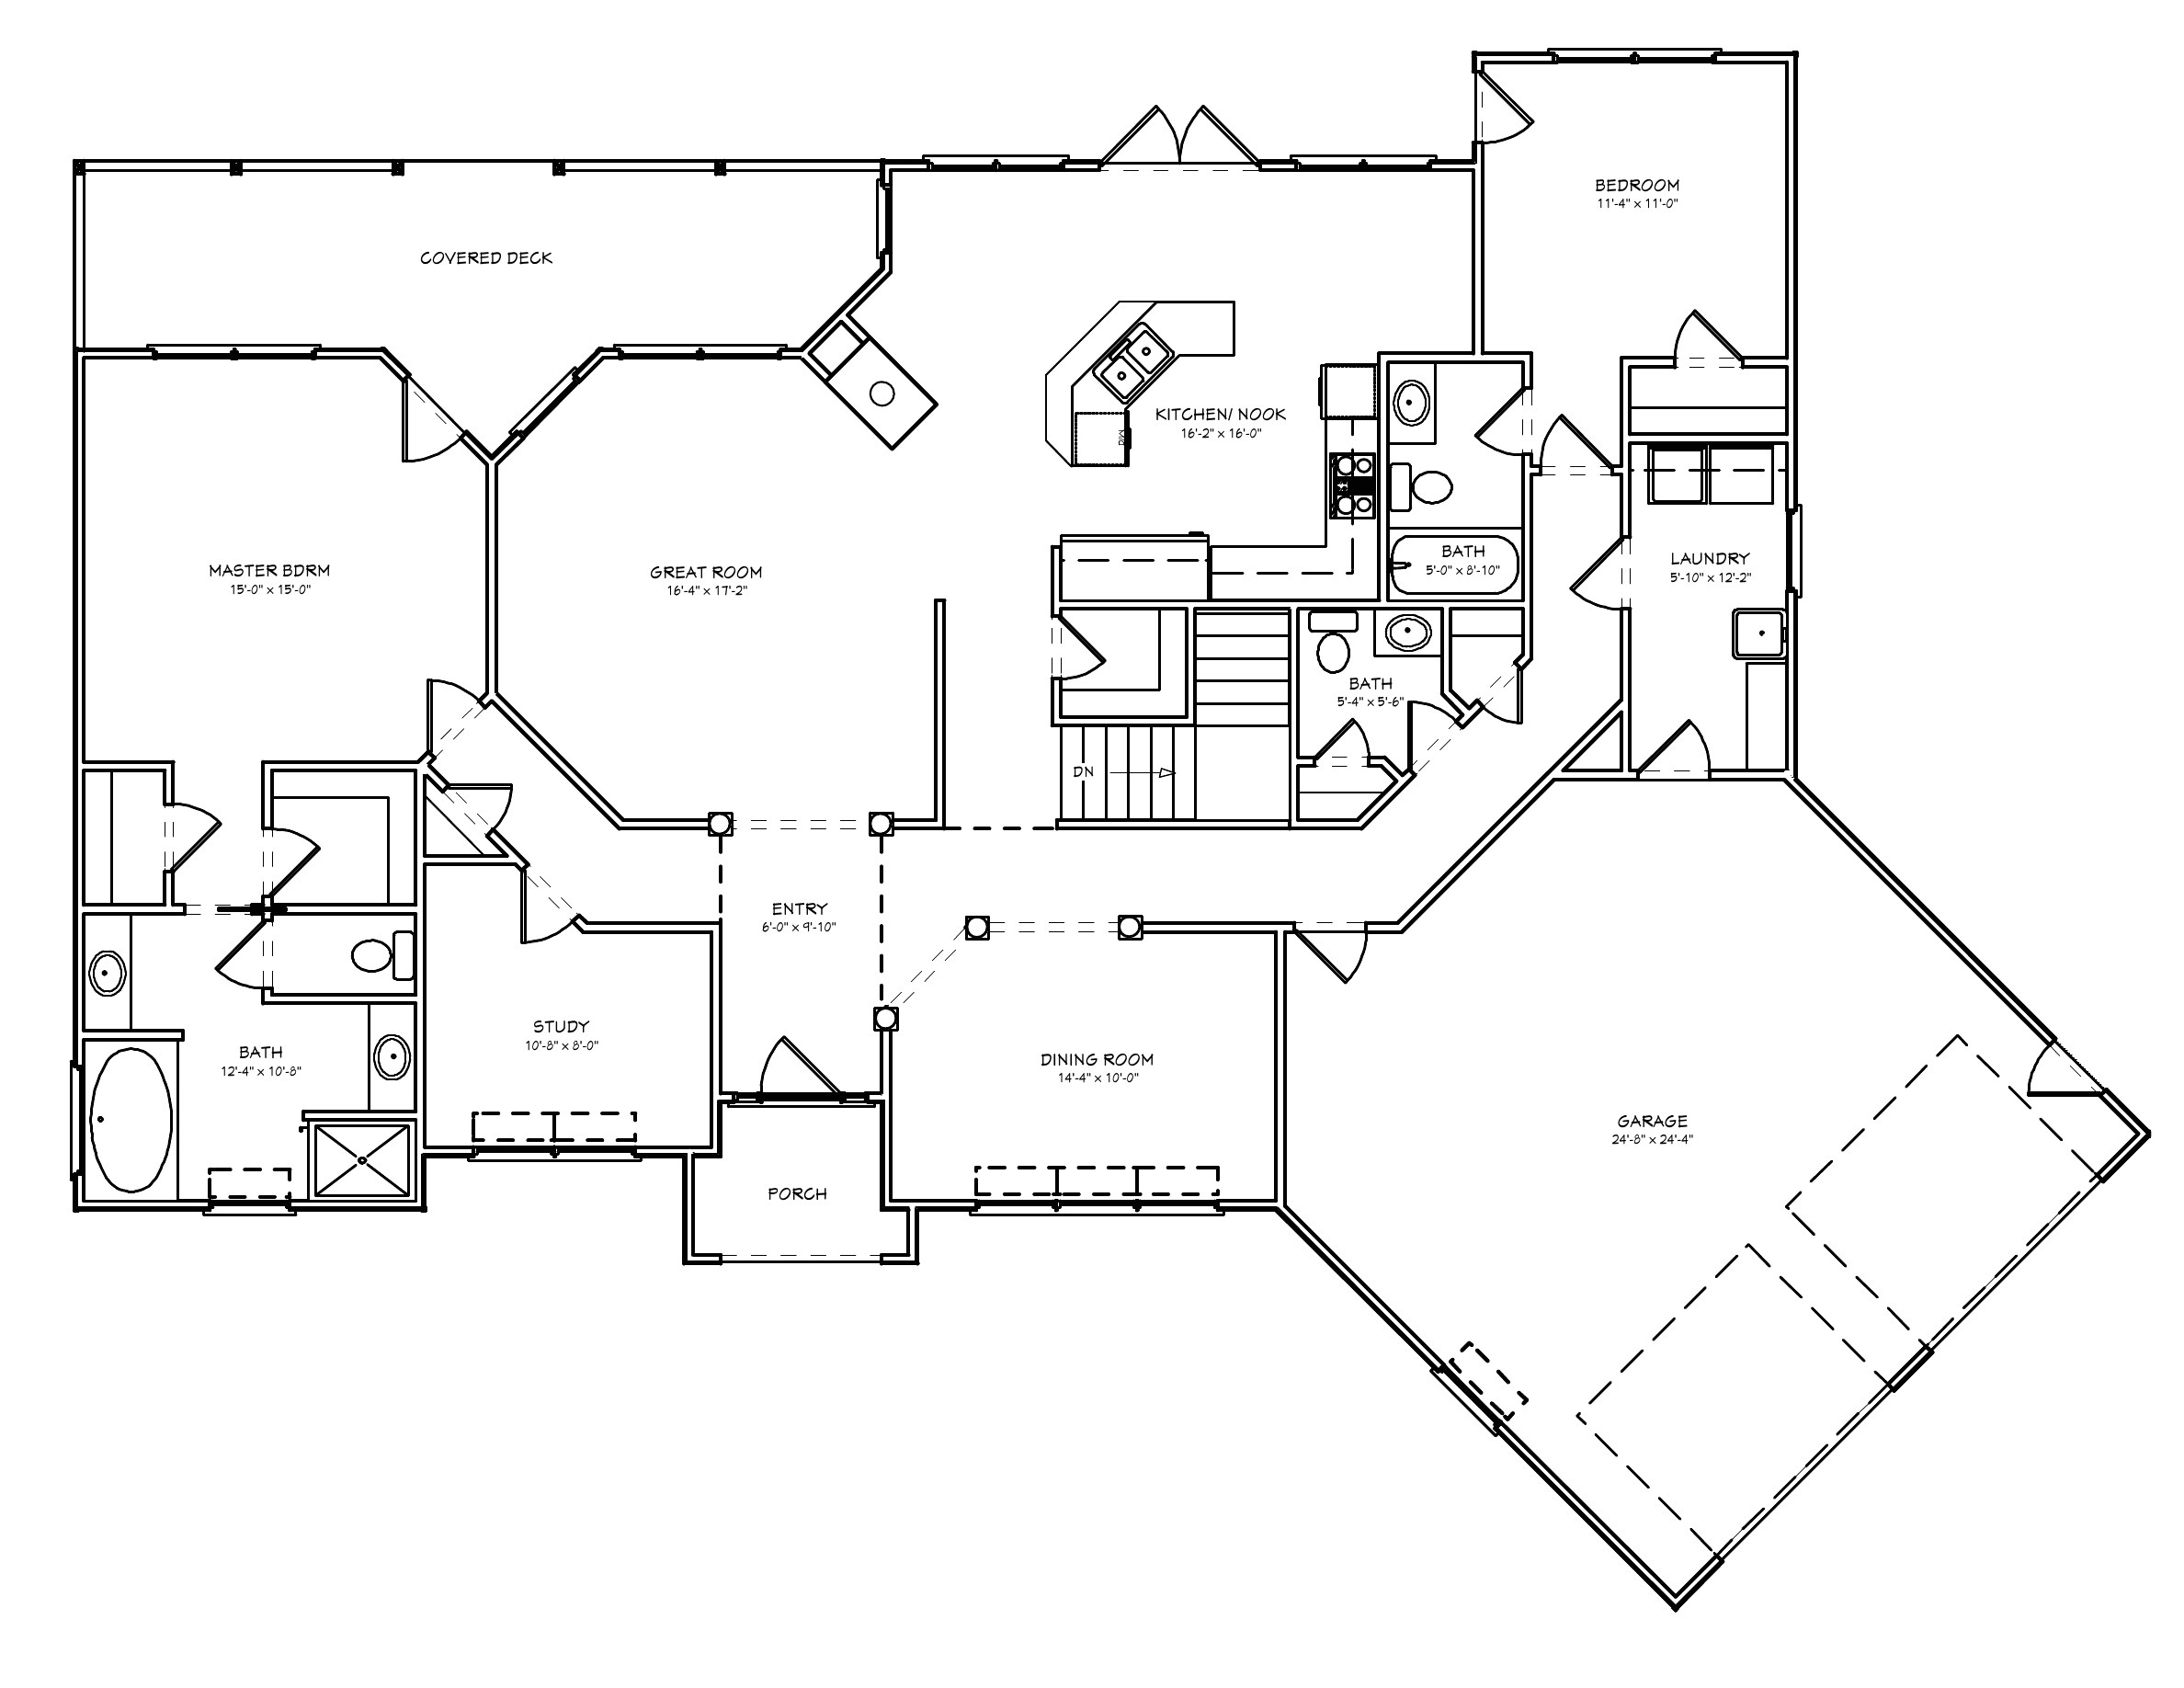 Retirement Home House Plans One Story Retirement House Plans